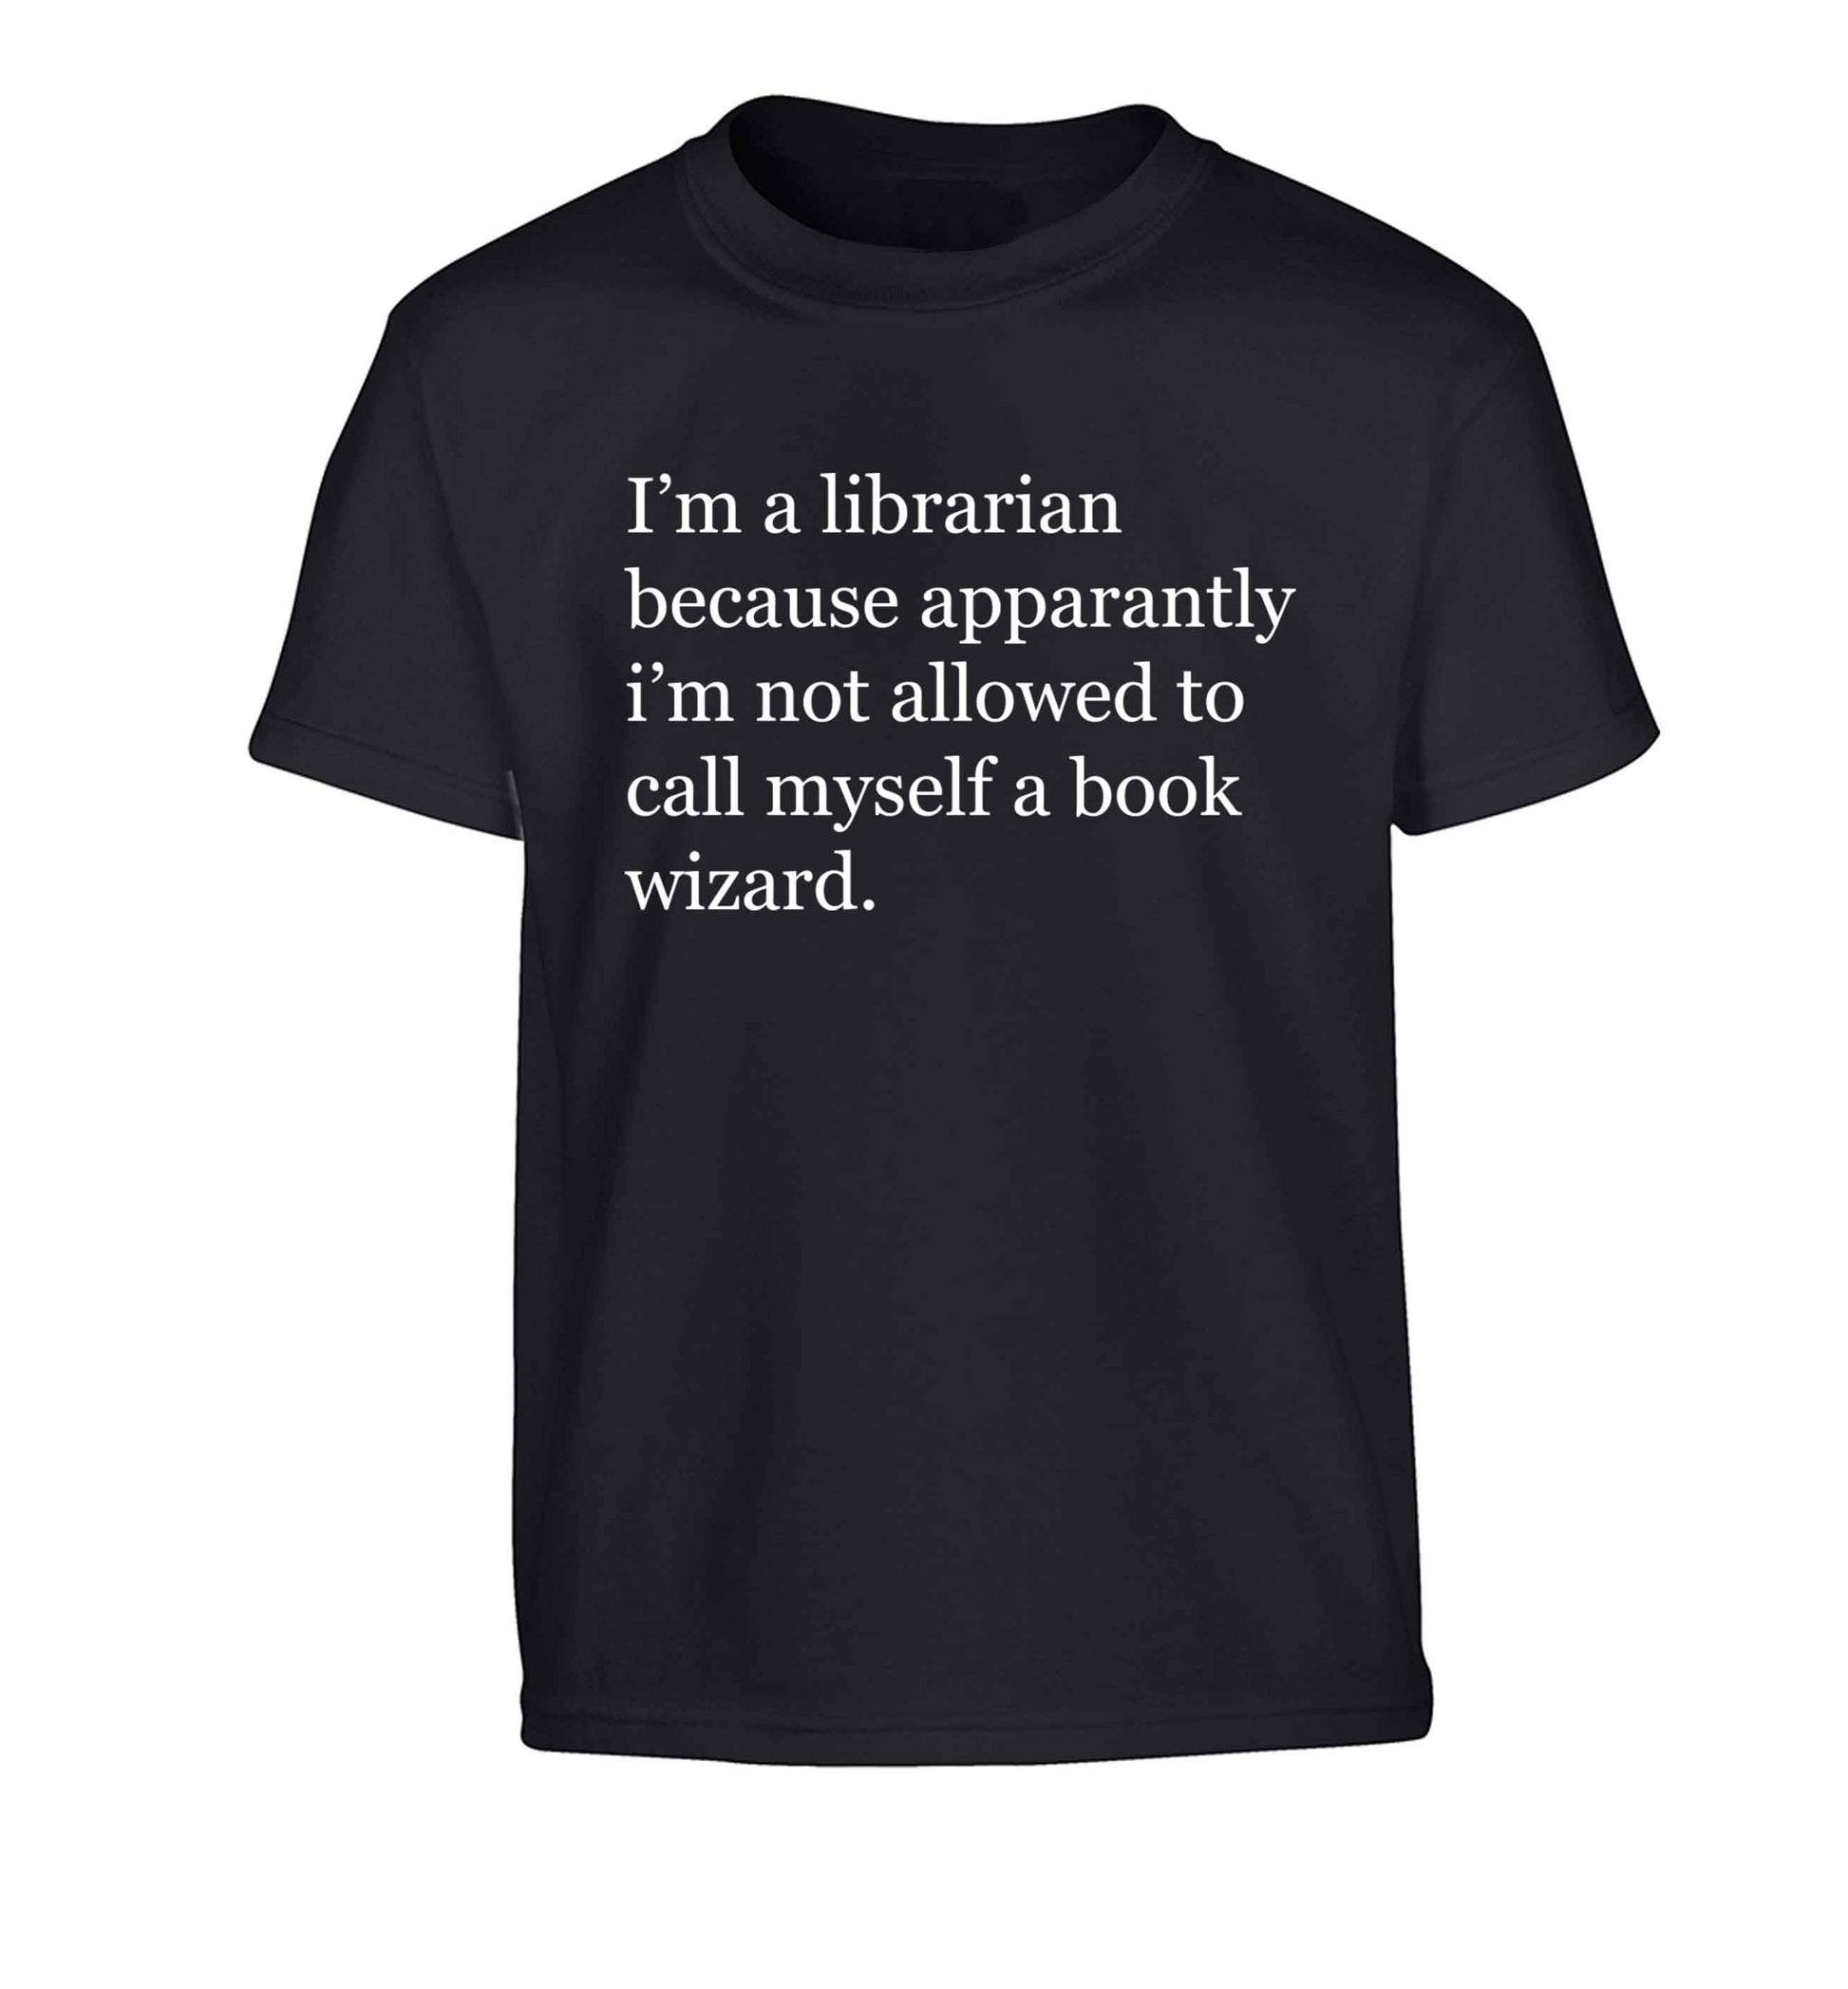 iÕm a librarian because apparantly iÕm not allowed to call myself a book wizard Children's black Tshirt 12-13 Years